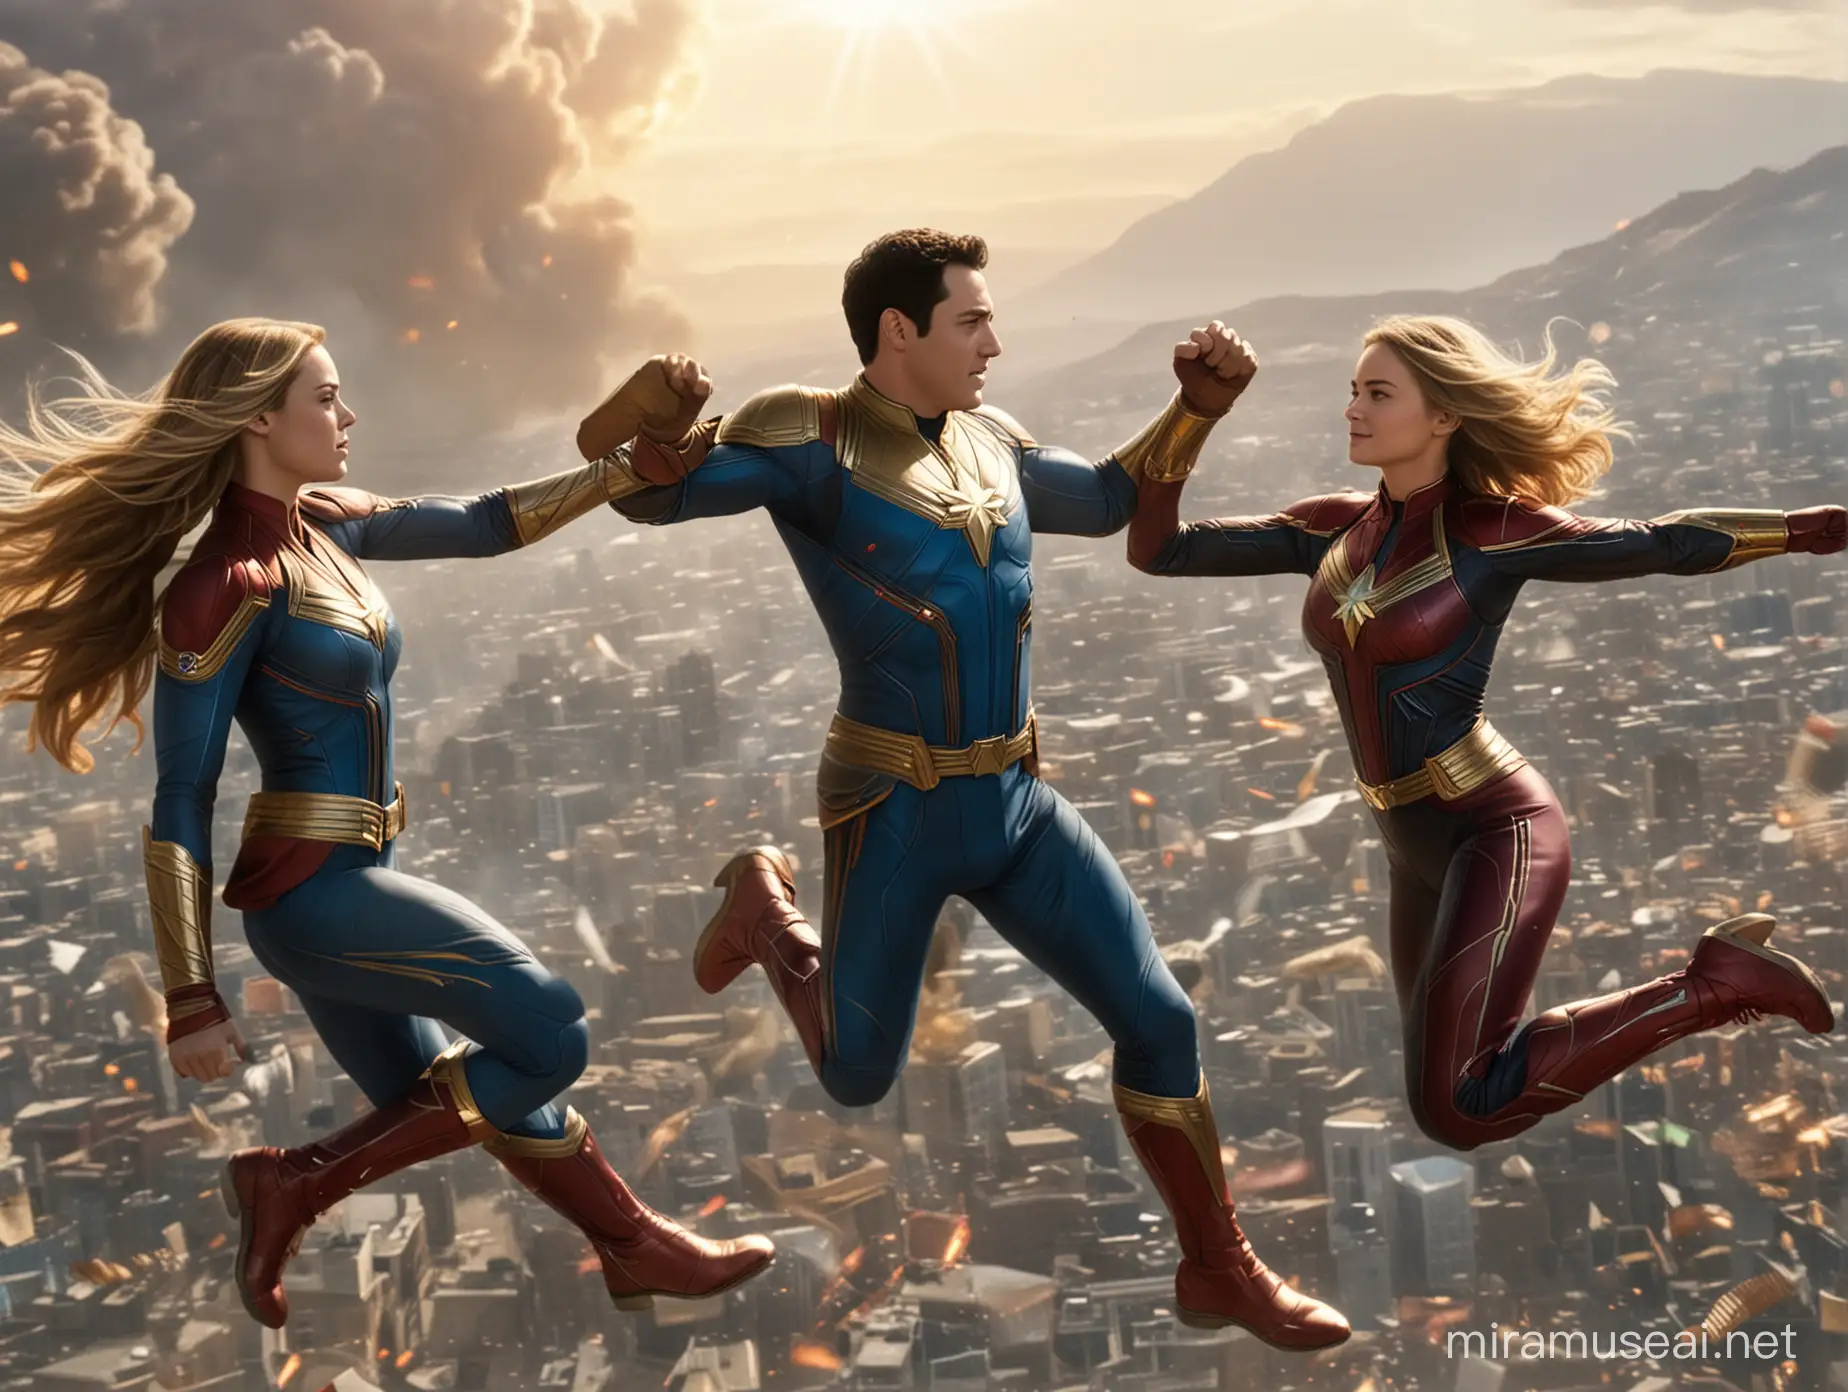 Zachary Levy as Shazam vs Brie Larson as Captain Marvel. The are flying slowly toward one another with the arm cocked to throw a punch. 